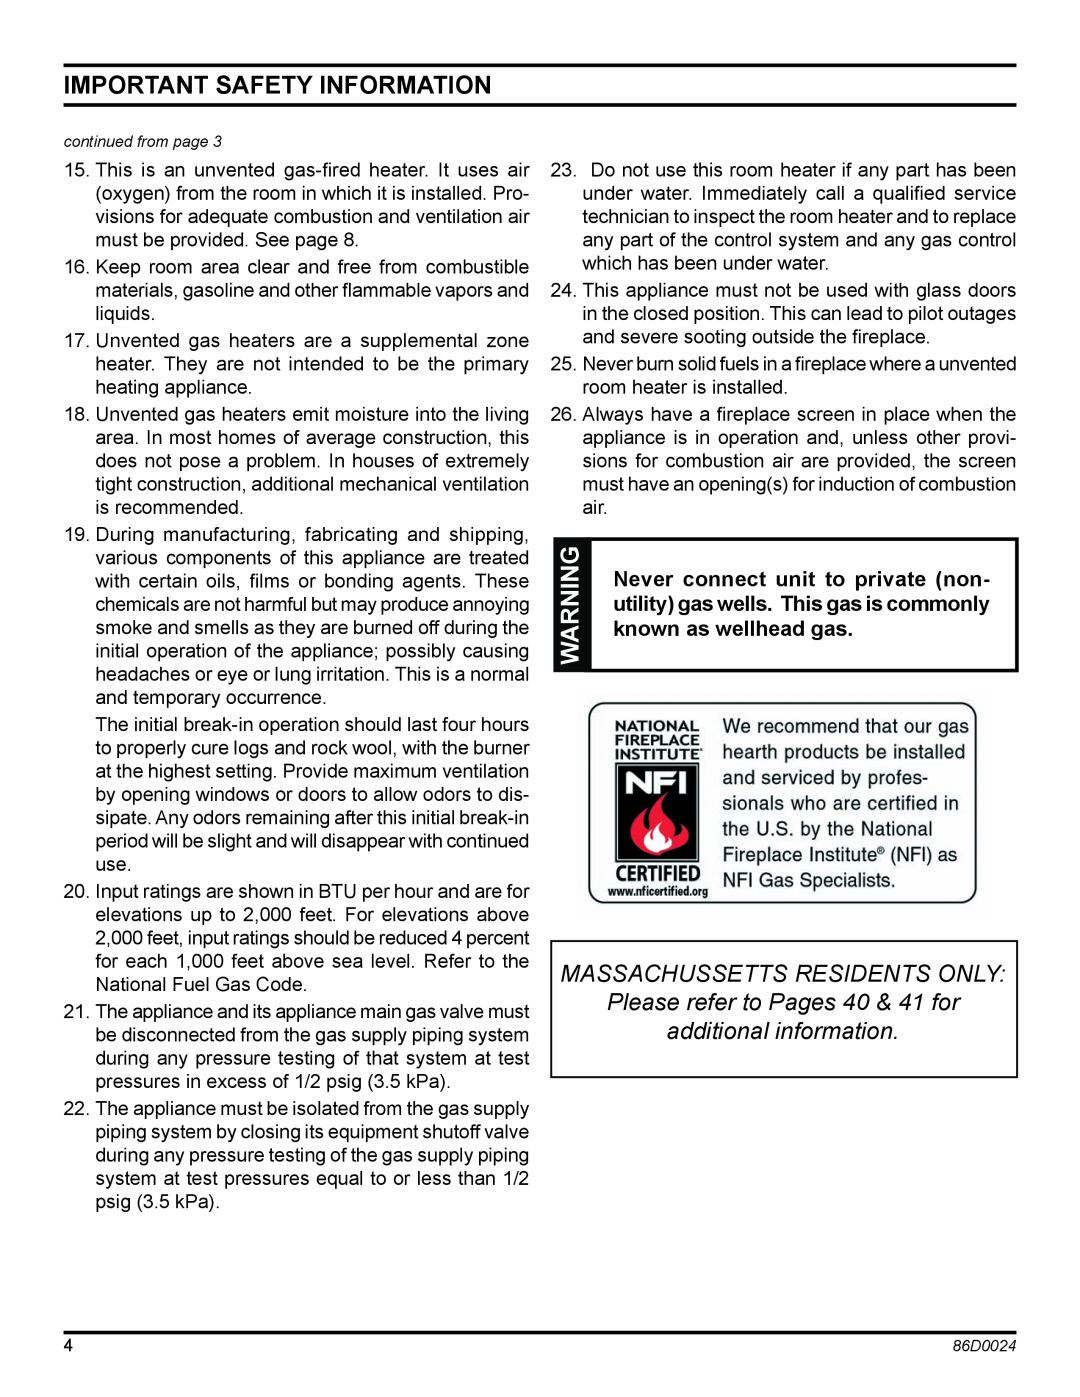 Monessen Hearth MJ27NR Important Safety Information, Massachussetts residents only, Please refer to Pages 40 & 41 for 